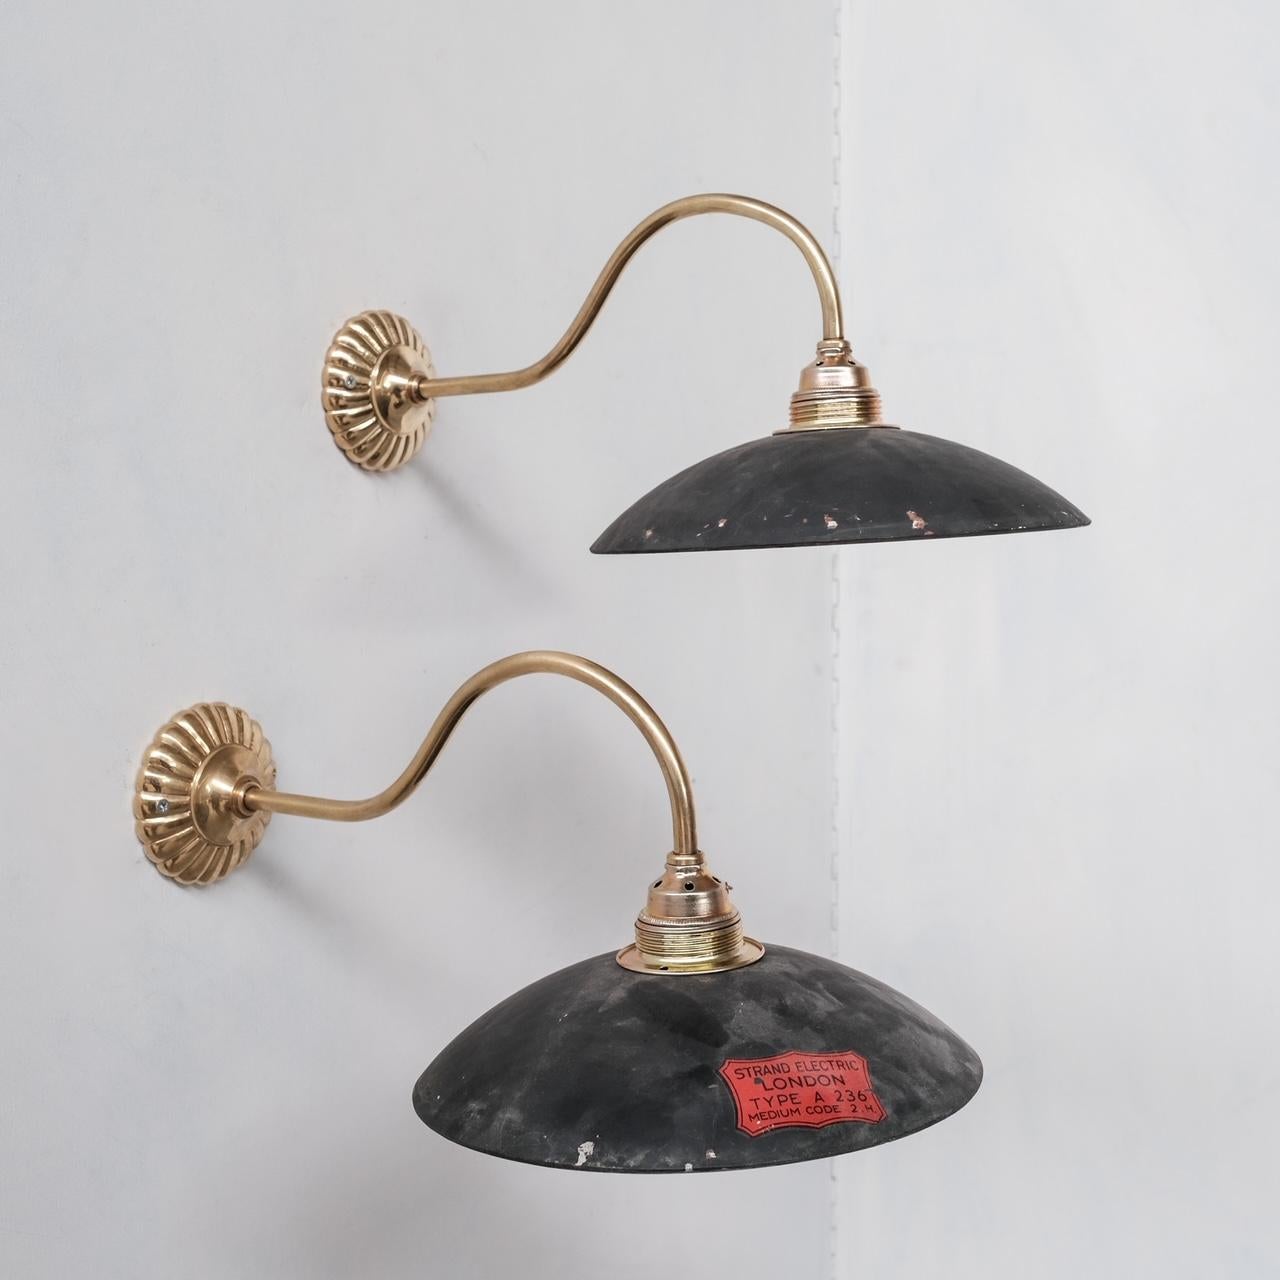 Antique Brass and Mercury Glass Wall Lights '19 Available' For Sale 8